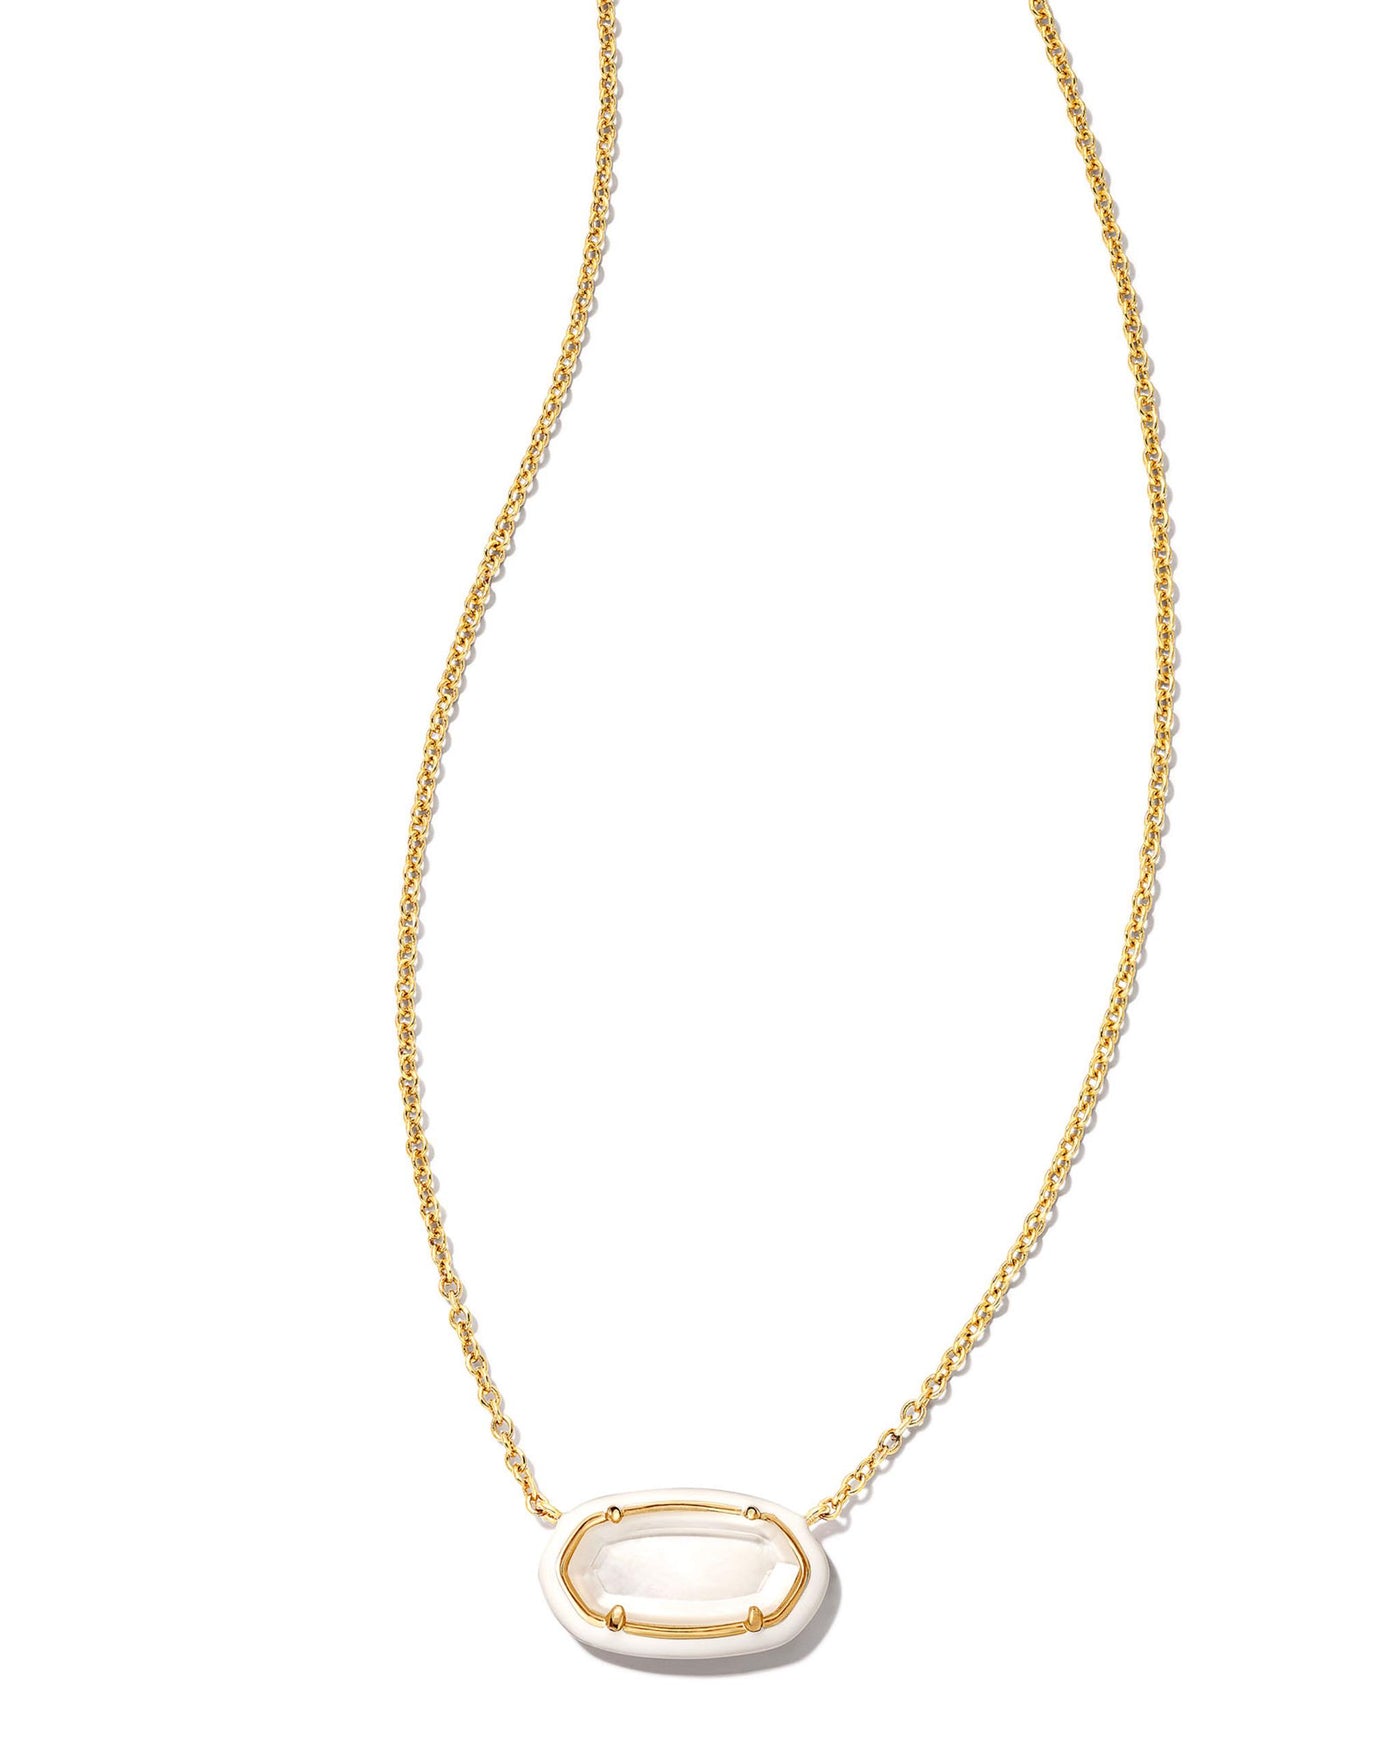 Gold Tone Necklace Featuring Ivory Mix by Kendra Scott